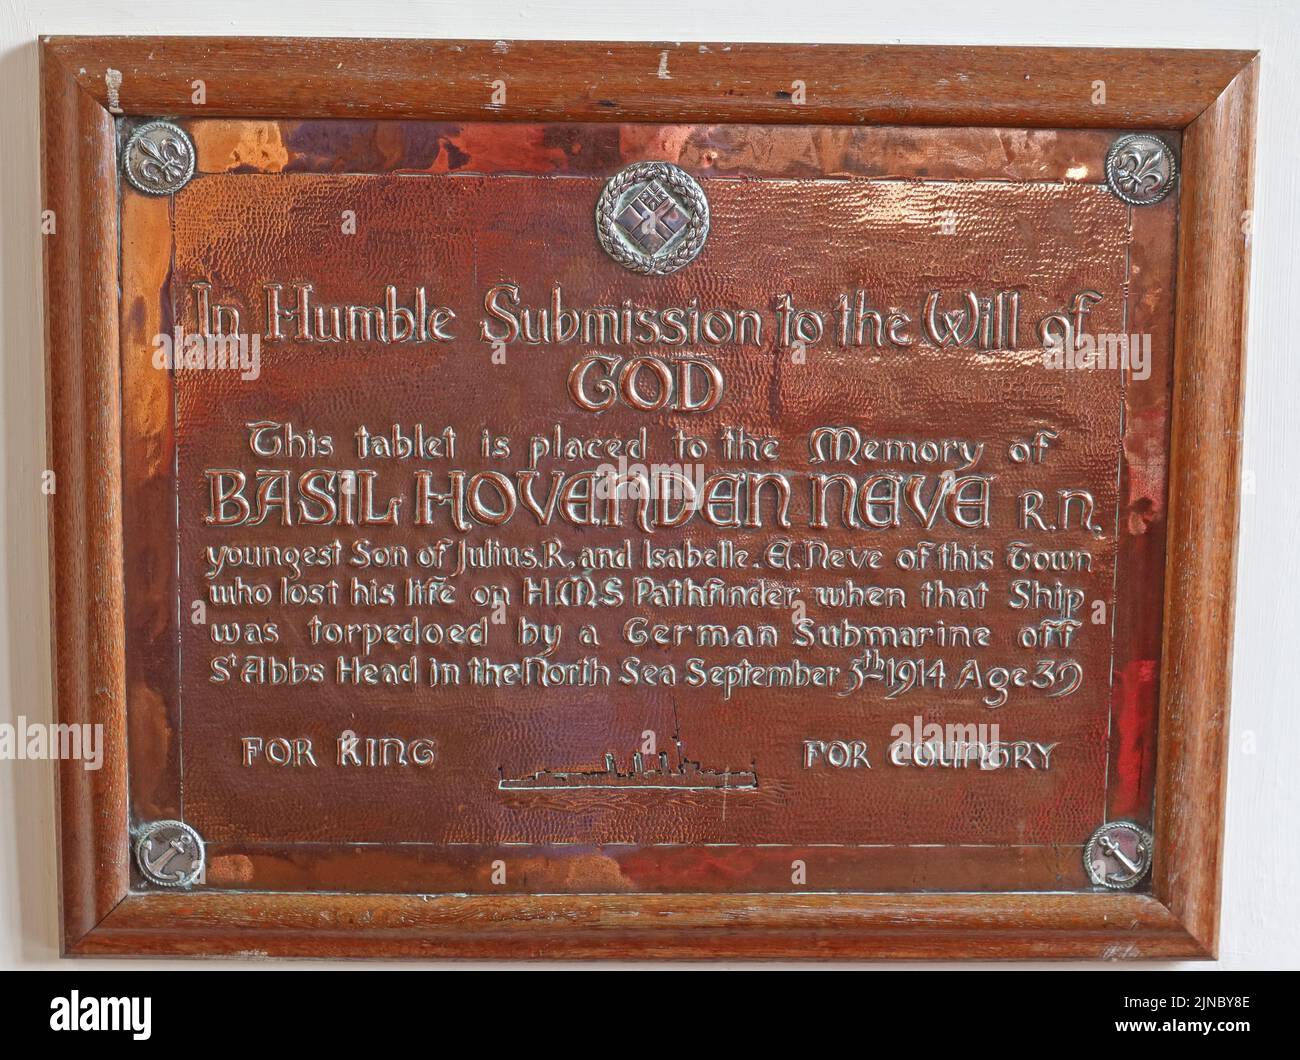 Copper Basil Hovandan Nava plaque, at St James wool church ,Chipping Campden, Cotswolds, Oxfordshire, England, UK, GL55 6AA Stock Photo